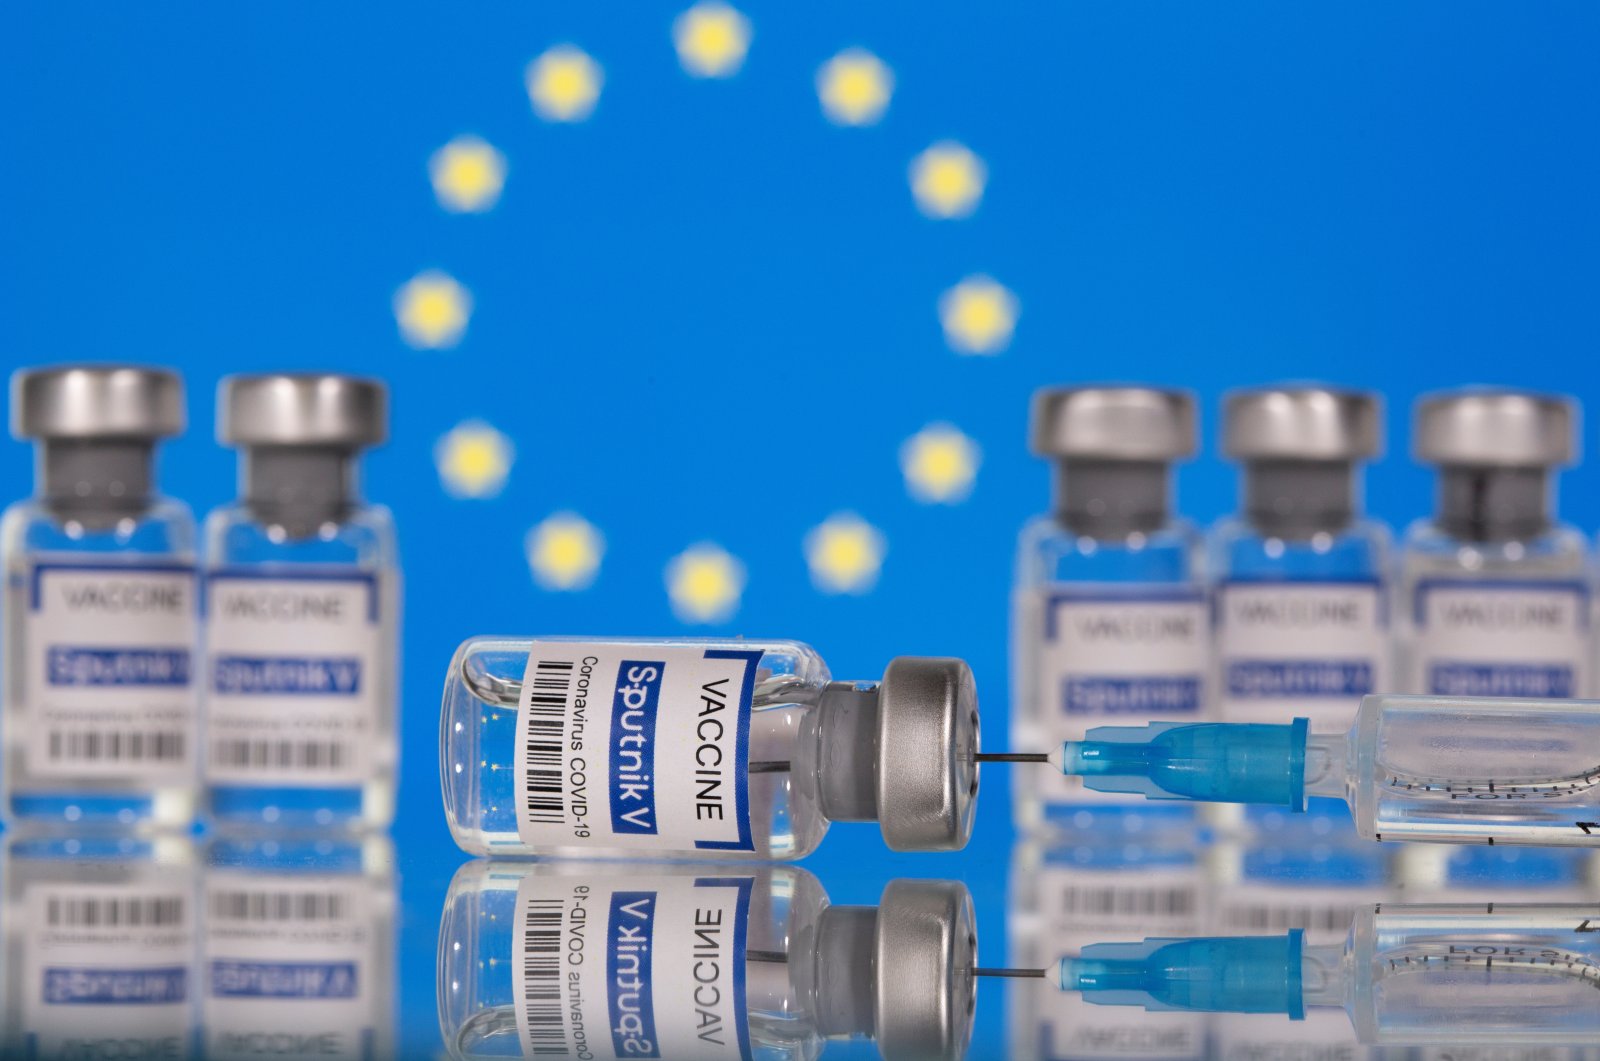 Vials labeled "Sputnik V Coronavirus COVID-19 Vaccine" and a syringe are seen in front of an EU flag, in this illustration photo taken on March 12, 2021. (Reuters Photo)